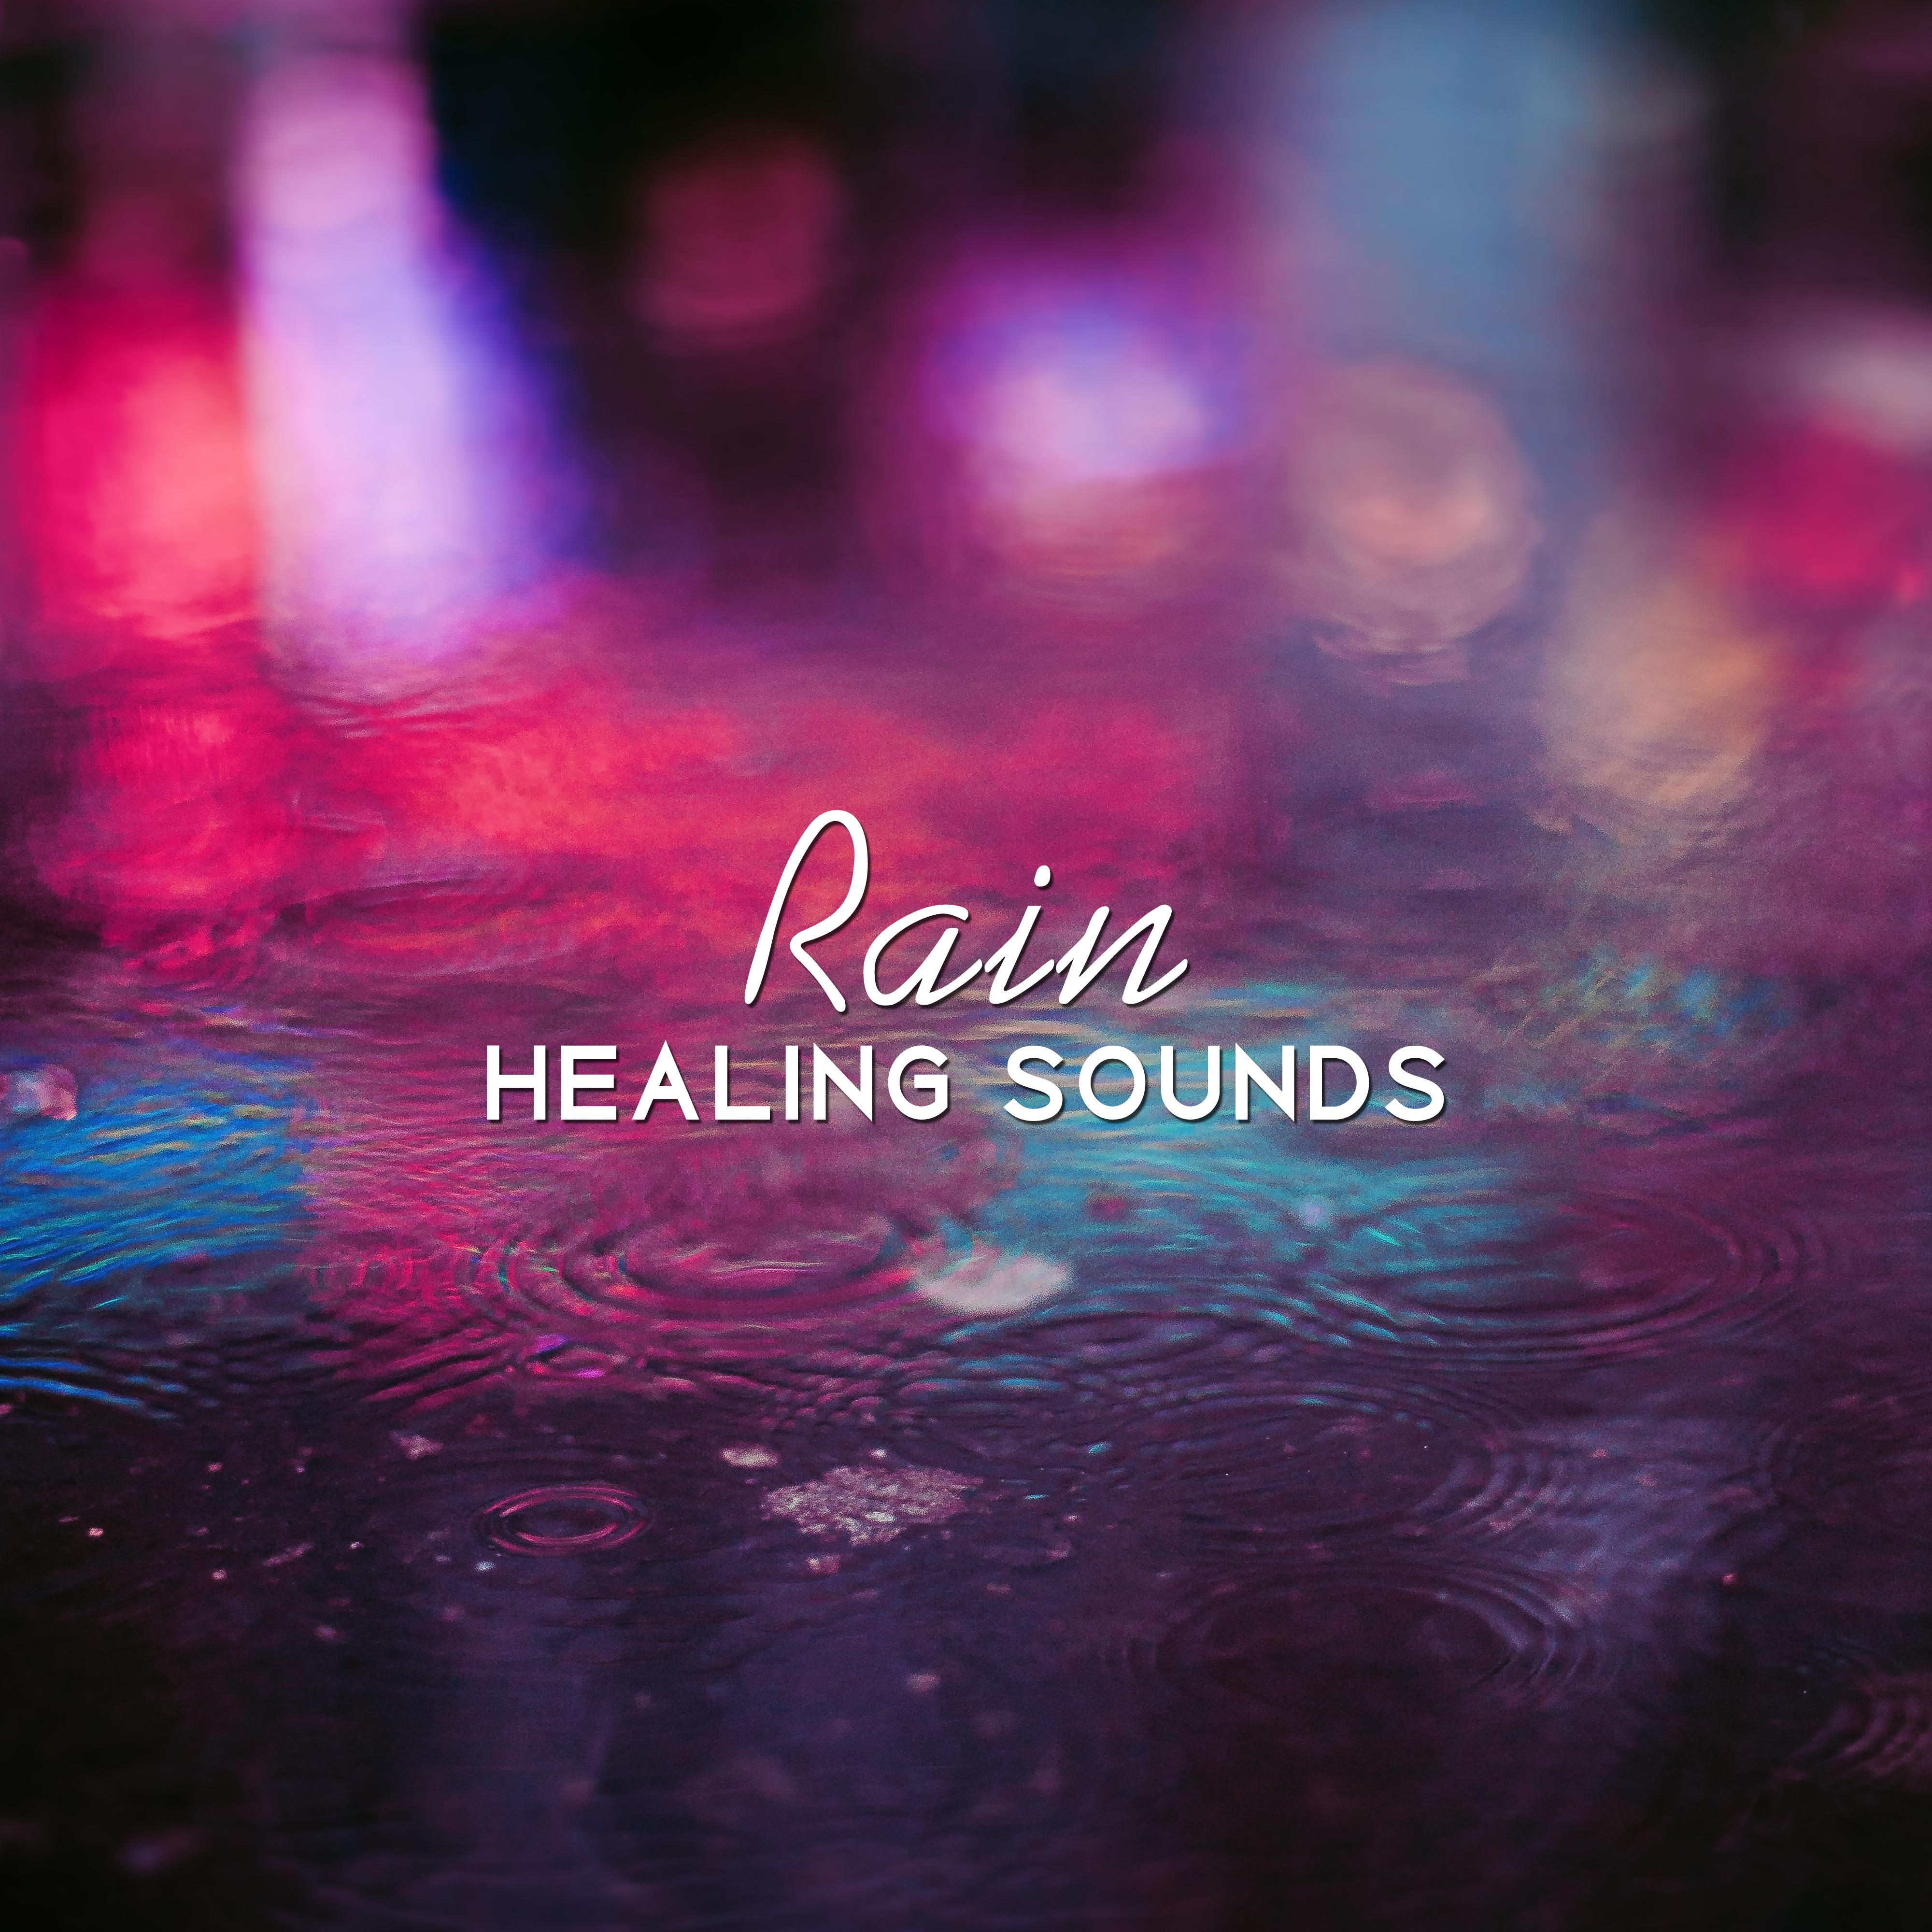 Rain Healing Sounds – Calming Waves to Rest, Sounds of Calmness, New Age Therapy, Soothing Music